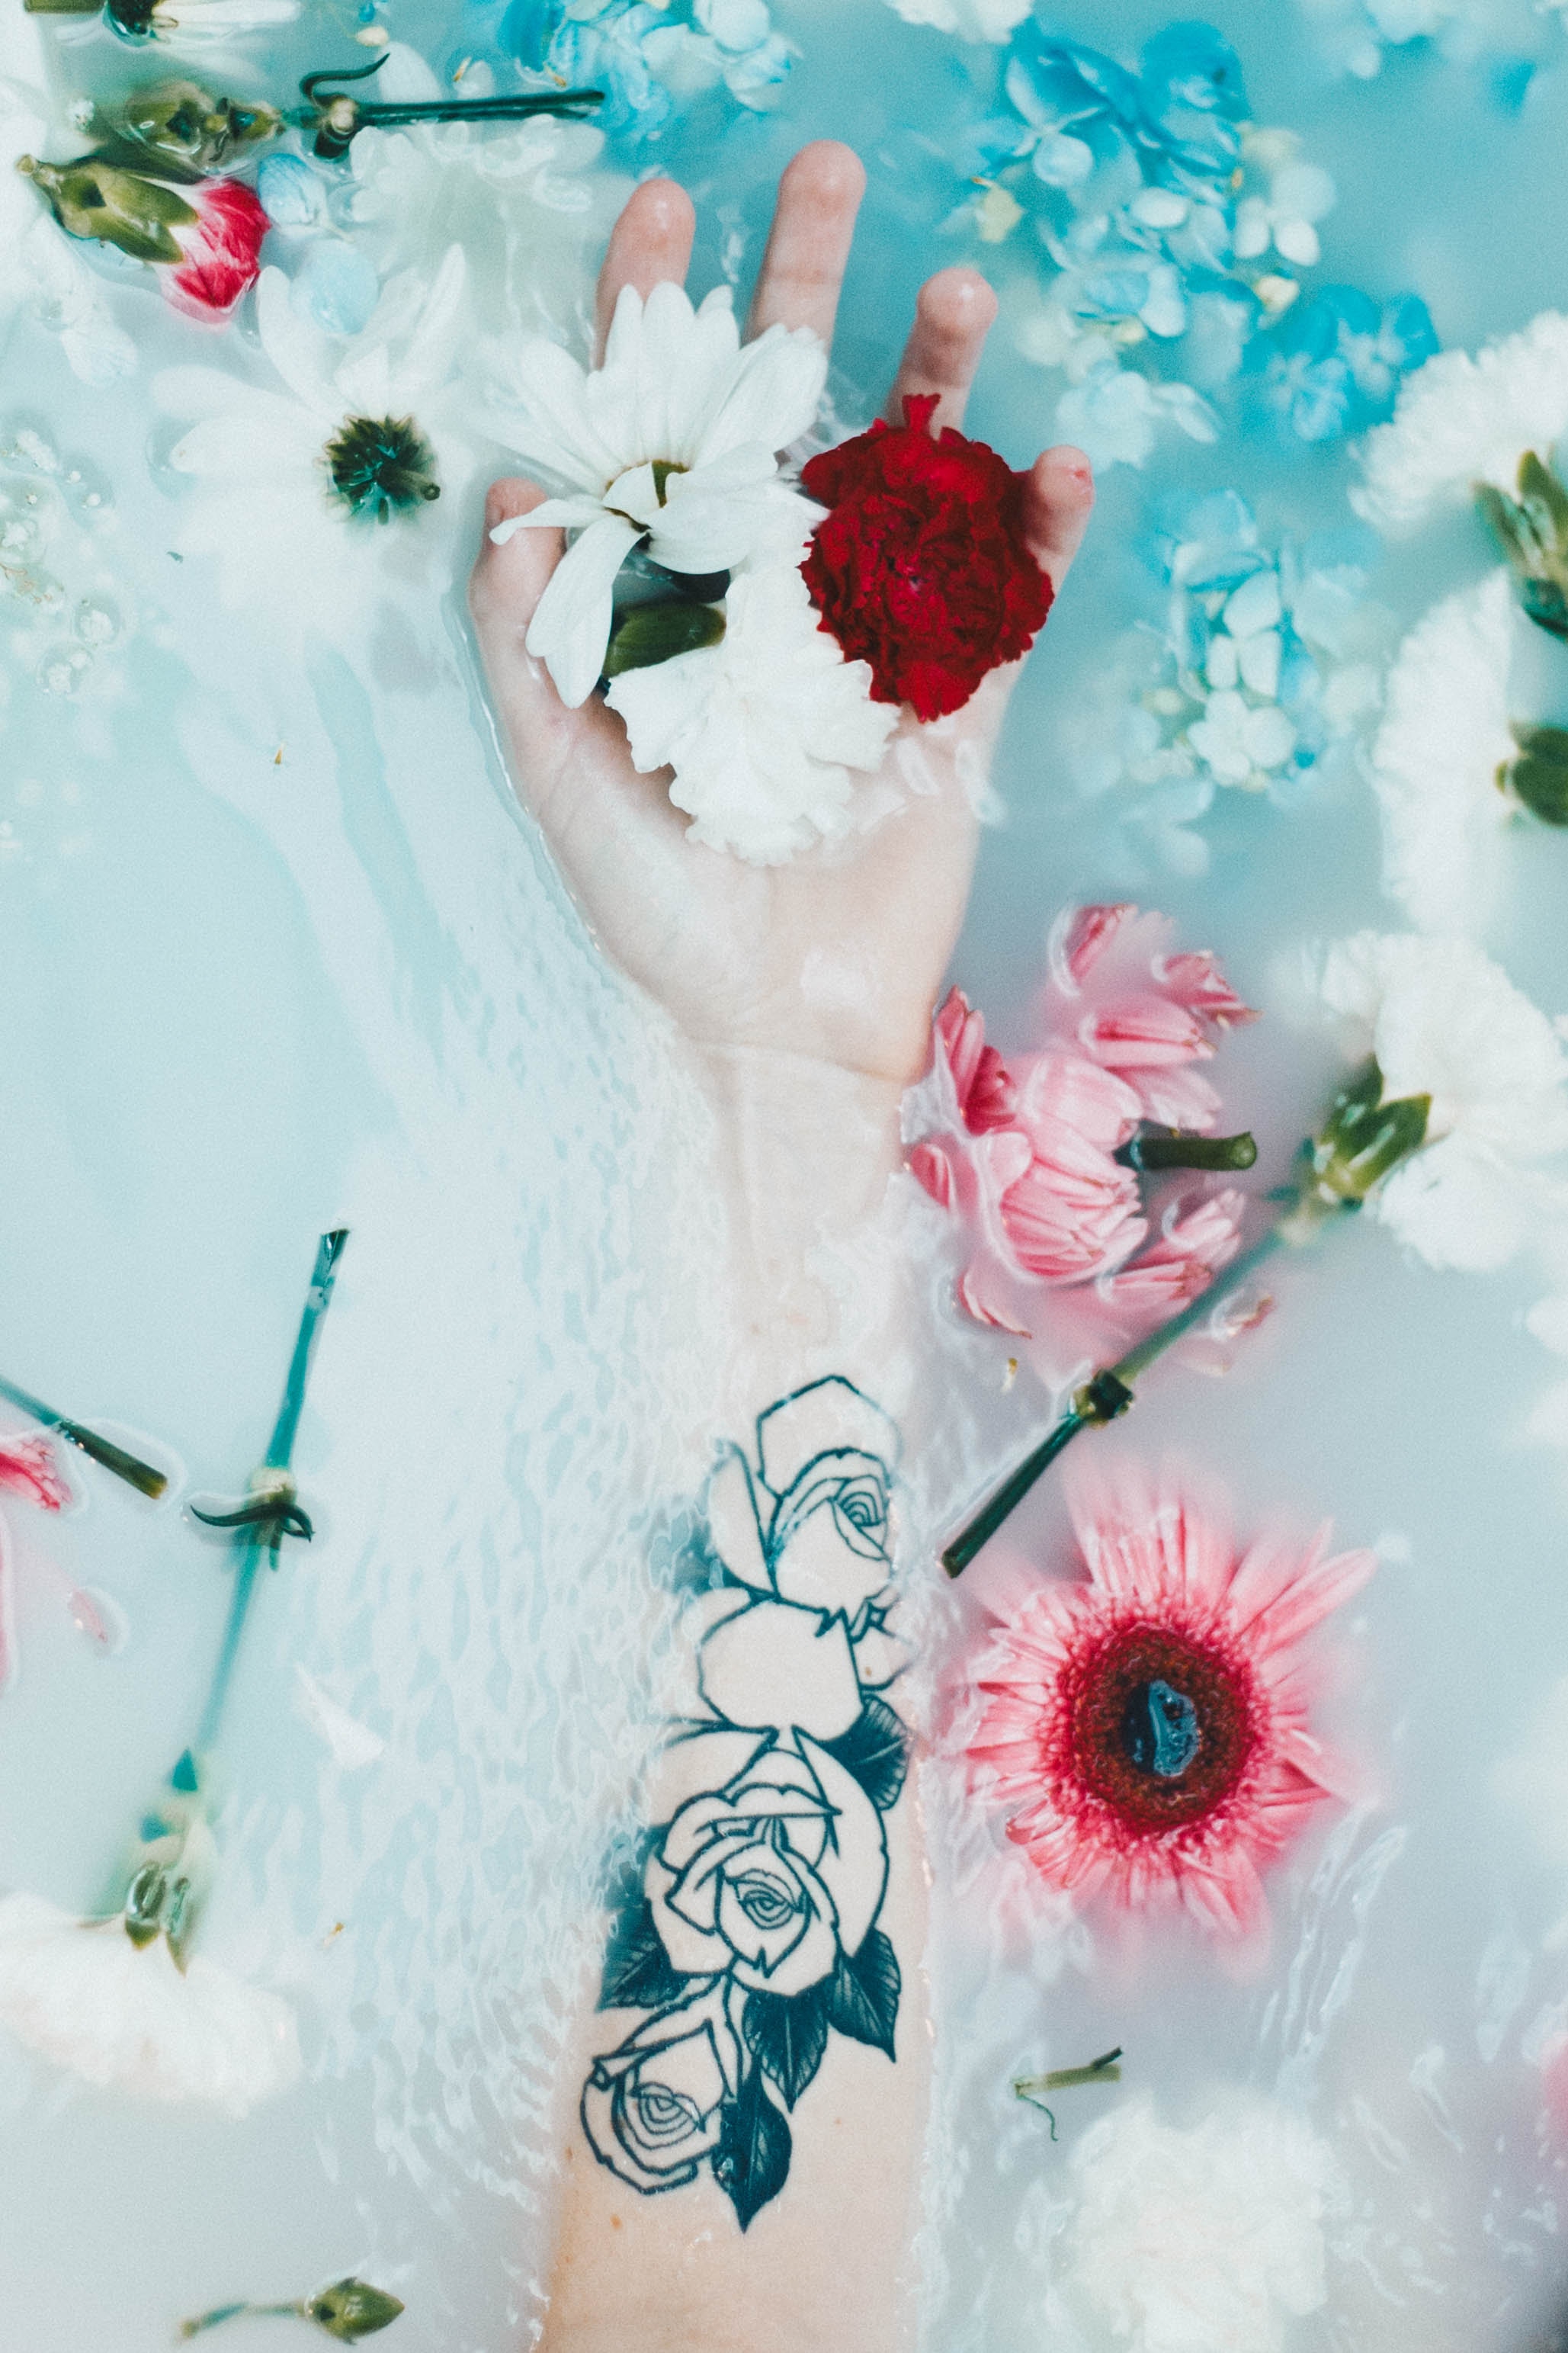 Download wallpaper 2057x3086 hand, tattoo, flowers, water hd background